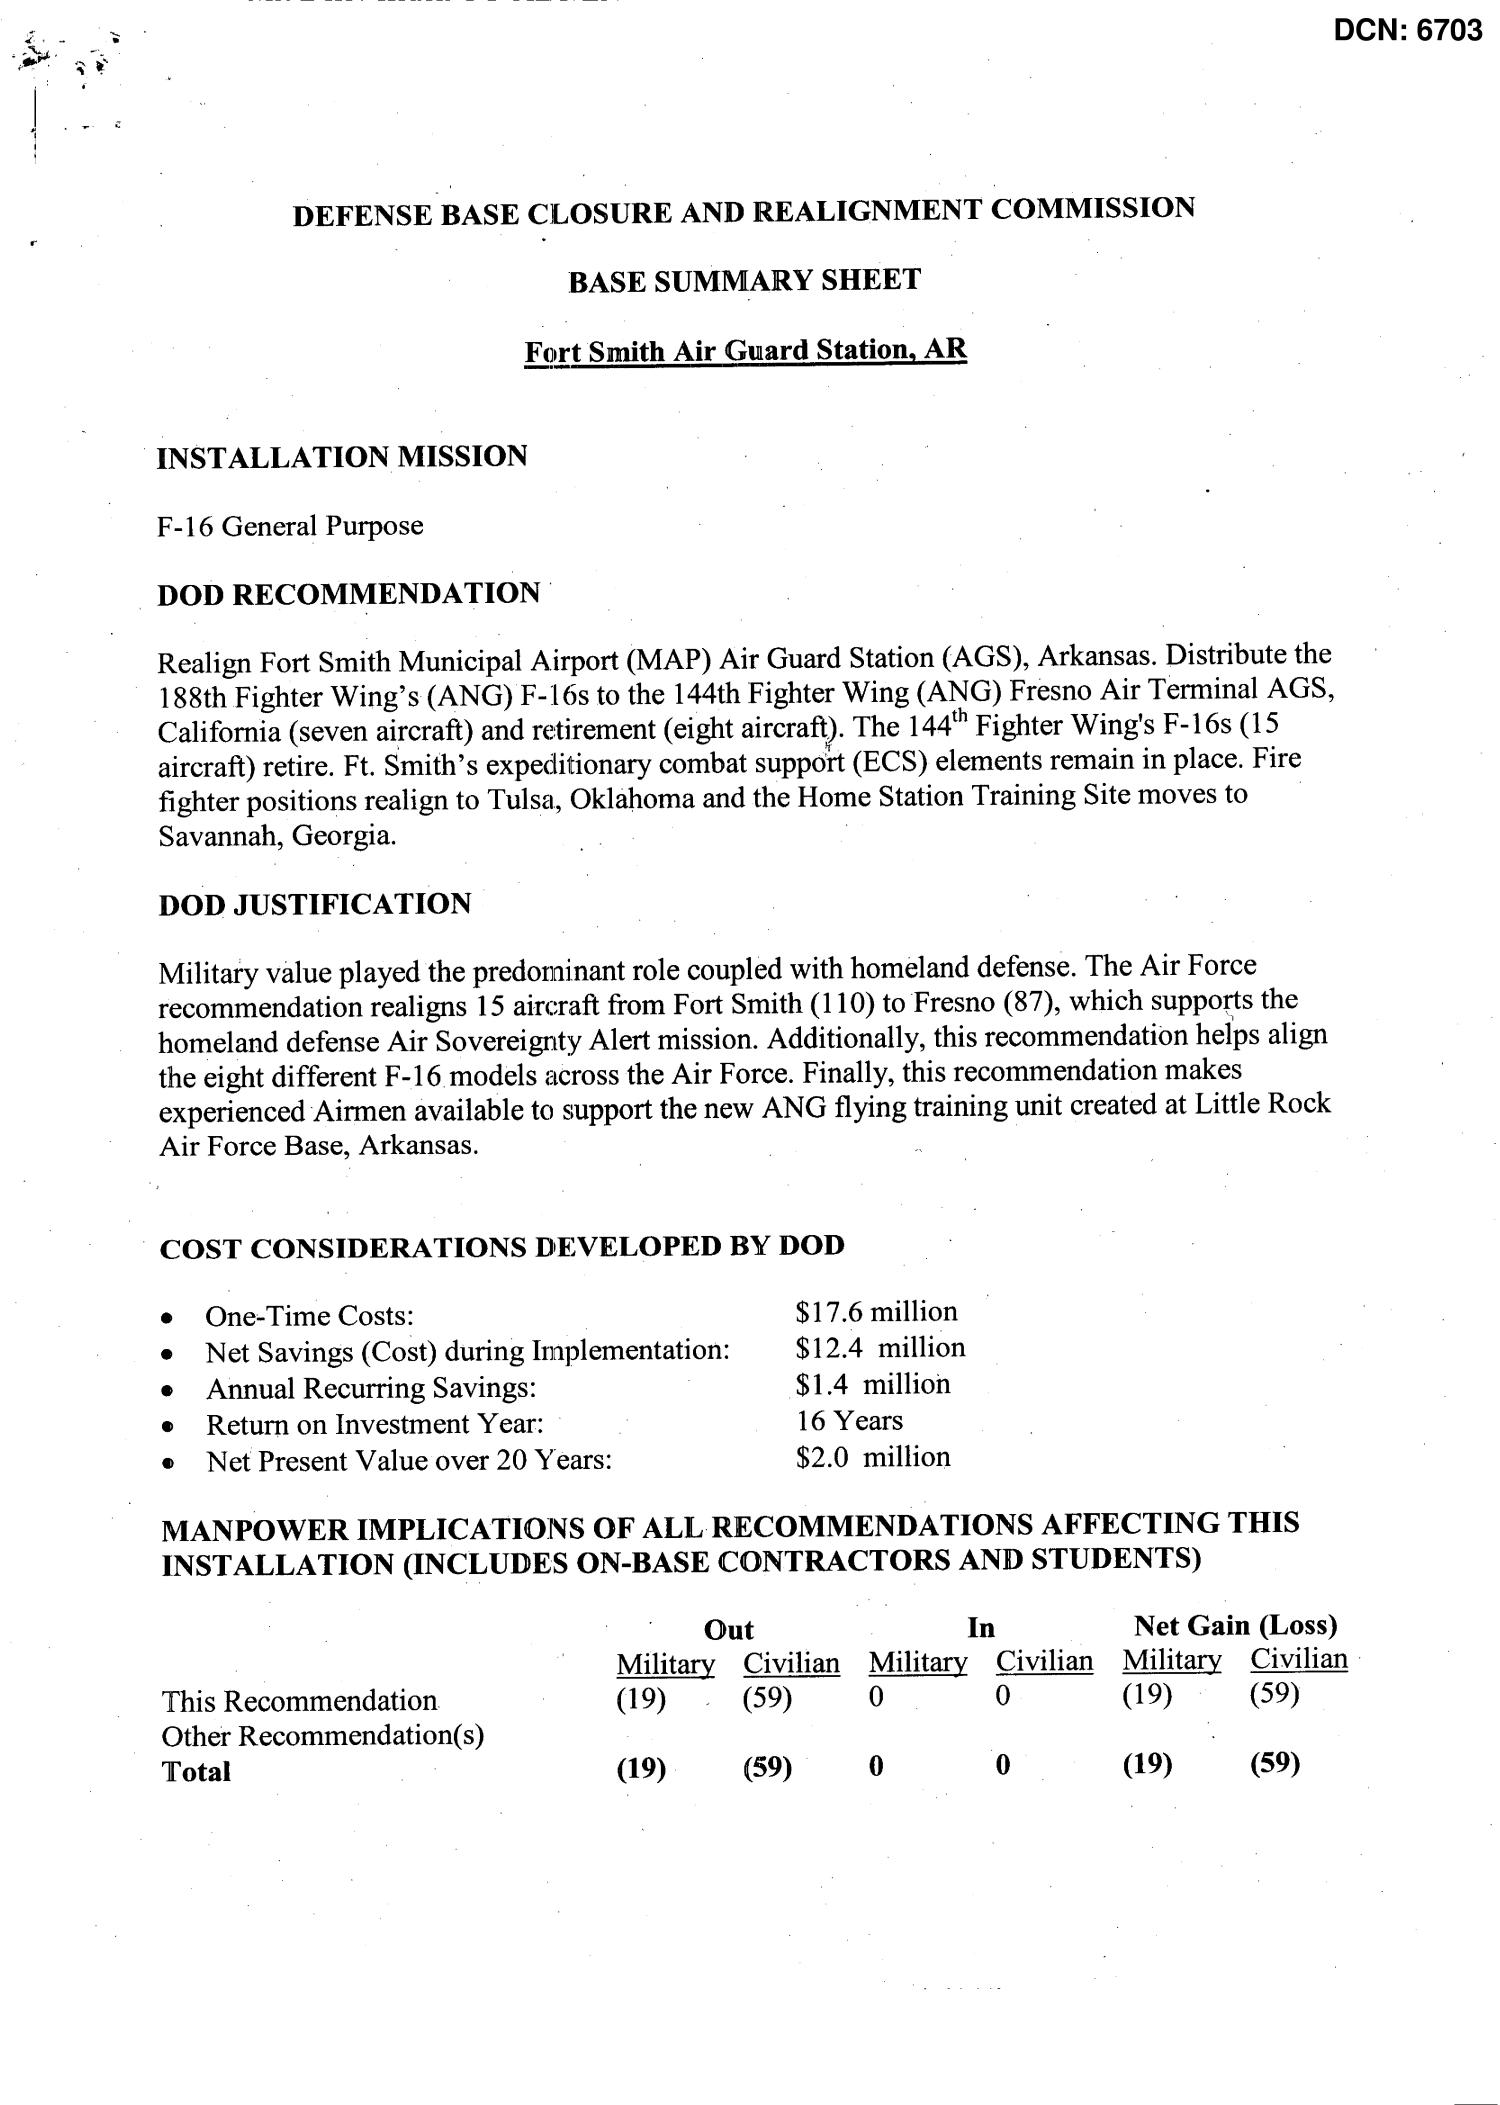 6703 - AF - F - Base Summary Sheet - Air Force - Fort Smith Air Guard Station - AR
                                                
                                                    [Sequence #]: 1 of 4
                                                